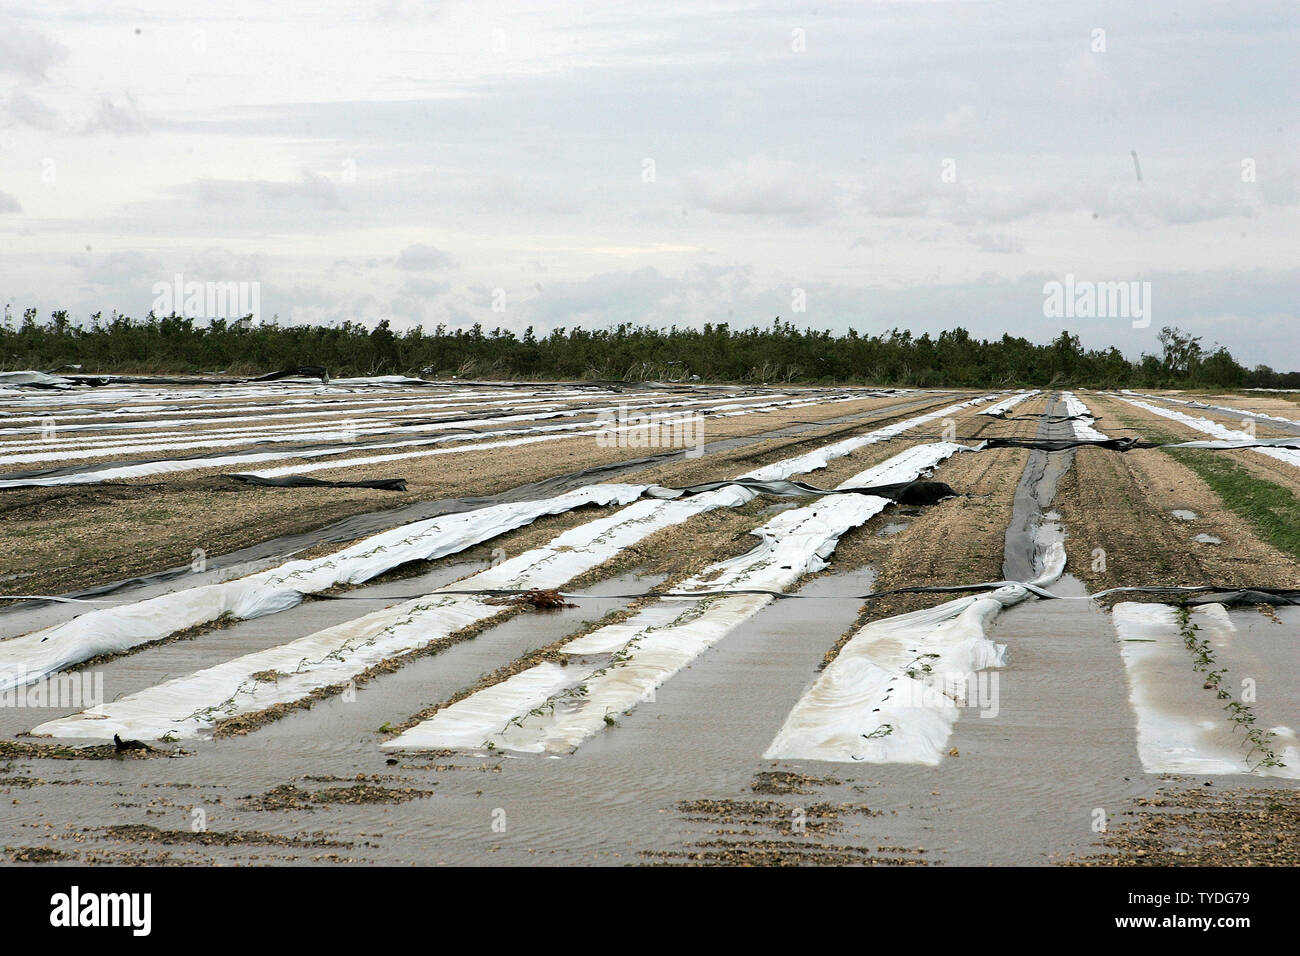 This newly planted strawberry field was destroyed by category 3 Hurricane Wilma in Miami, Florida, on October 24, 2005.  (UPI Photo/Michael Bush) Stock Photo